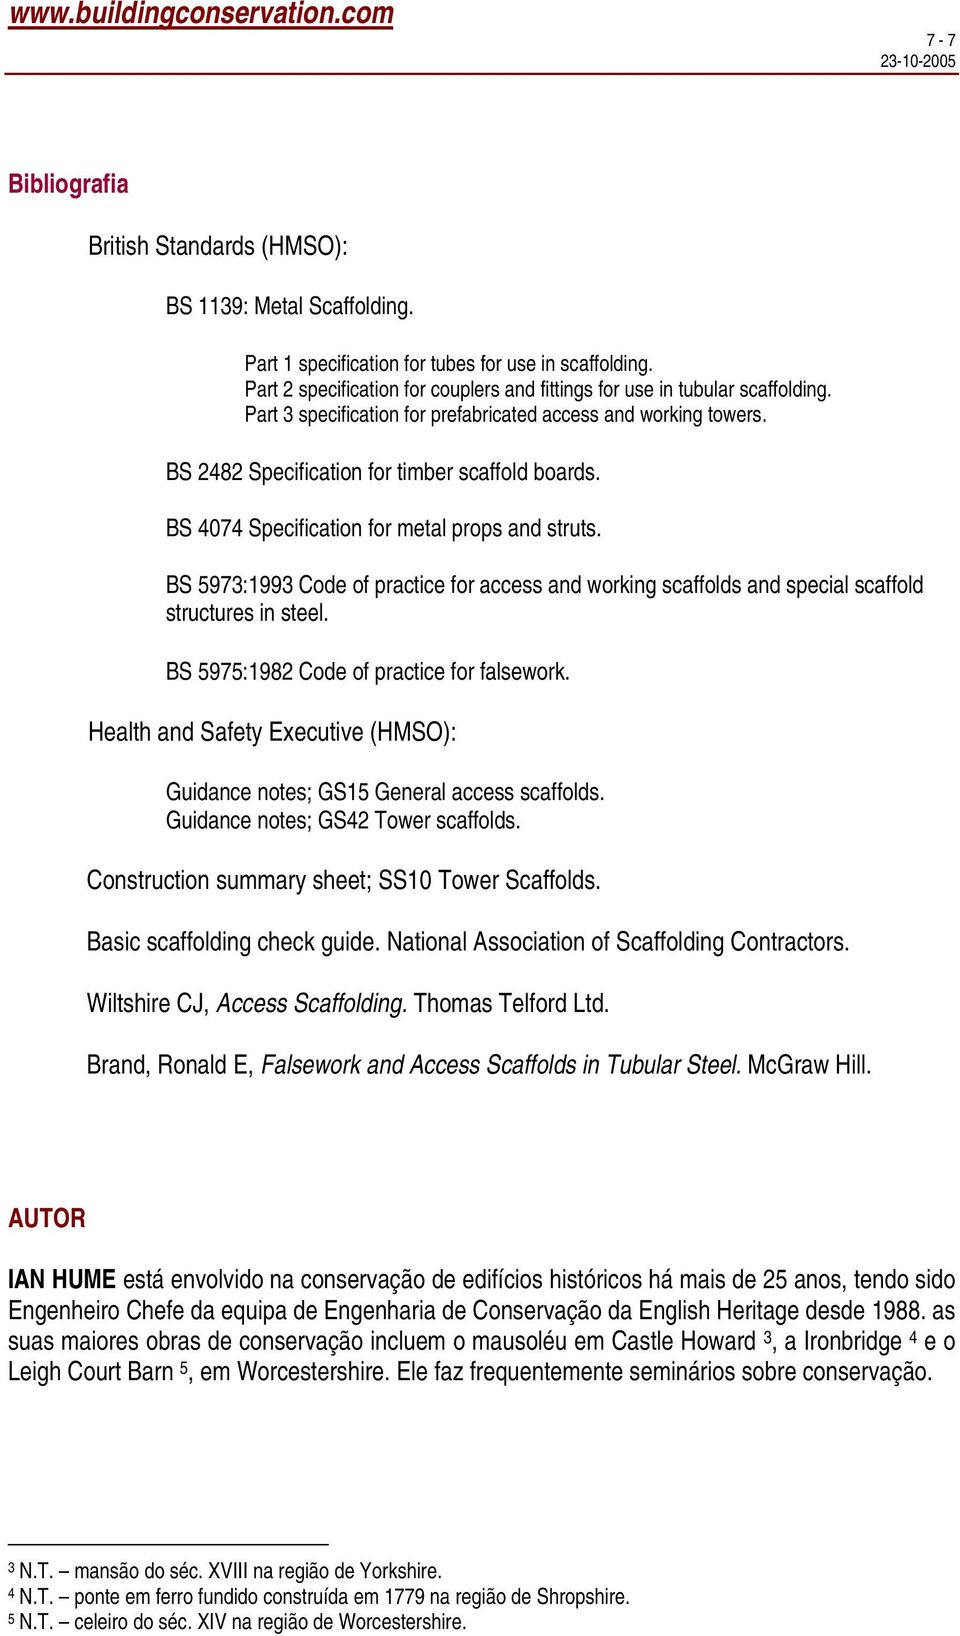 BS 4074 Specification for metal props and struts. BS 5973:1993 Code of practice for access and working scaffolds and special scaffold structures in steel. BS 5975:1982 Code of practice for falsework.